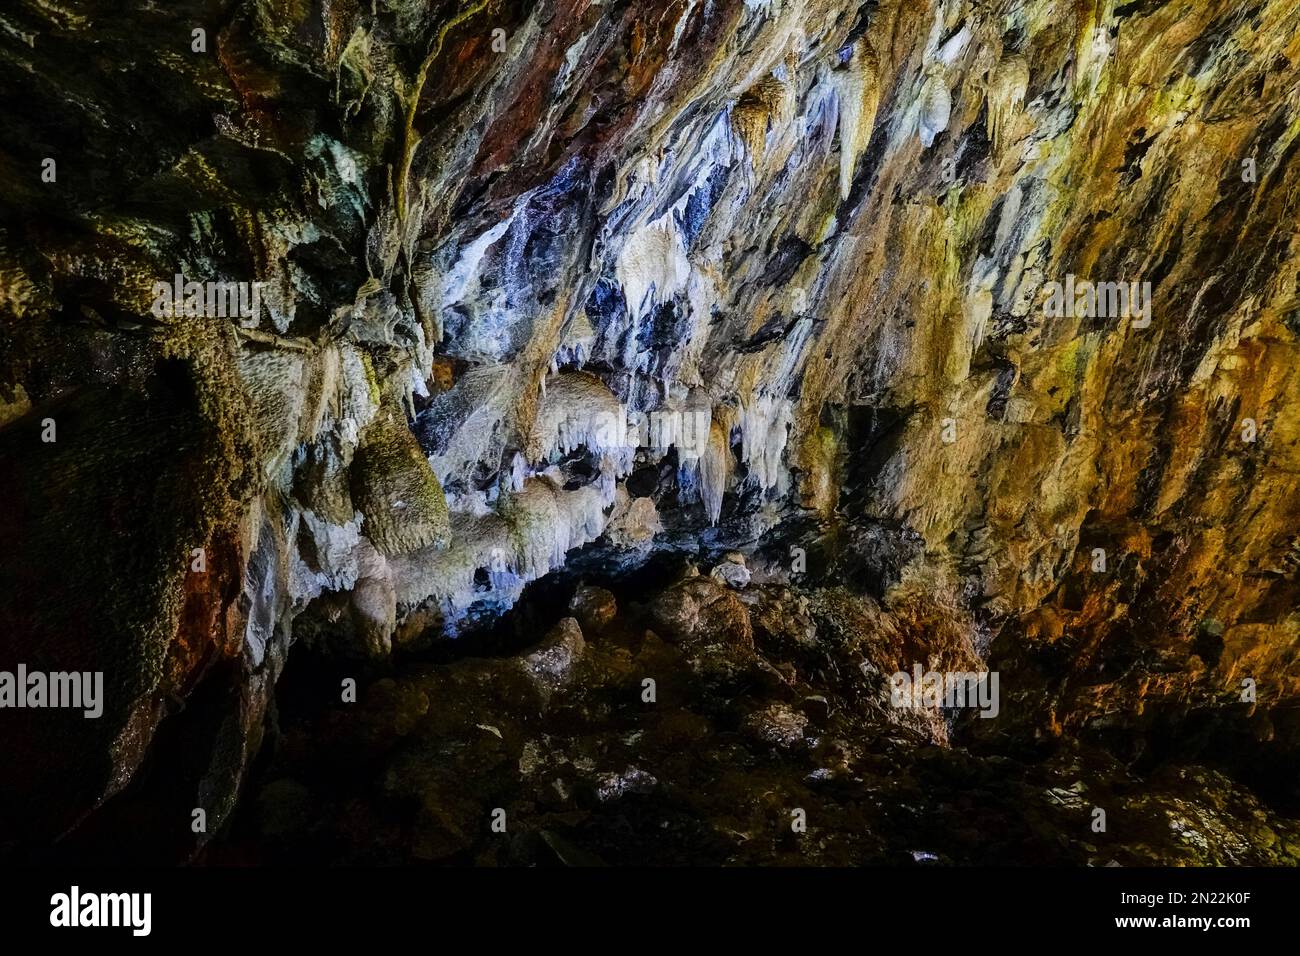 Silicate stalactites inside the Algar do Carvão a vertical lava tube dropping 300 feet from the surface accessible by a narrow staircase to a clear water pool at the bottom in the central mountains, Terceira Island, Azores, Portugal. Stock Photo